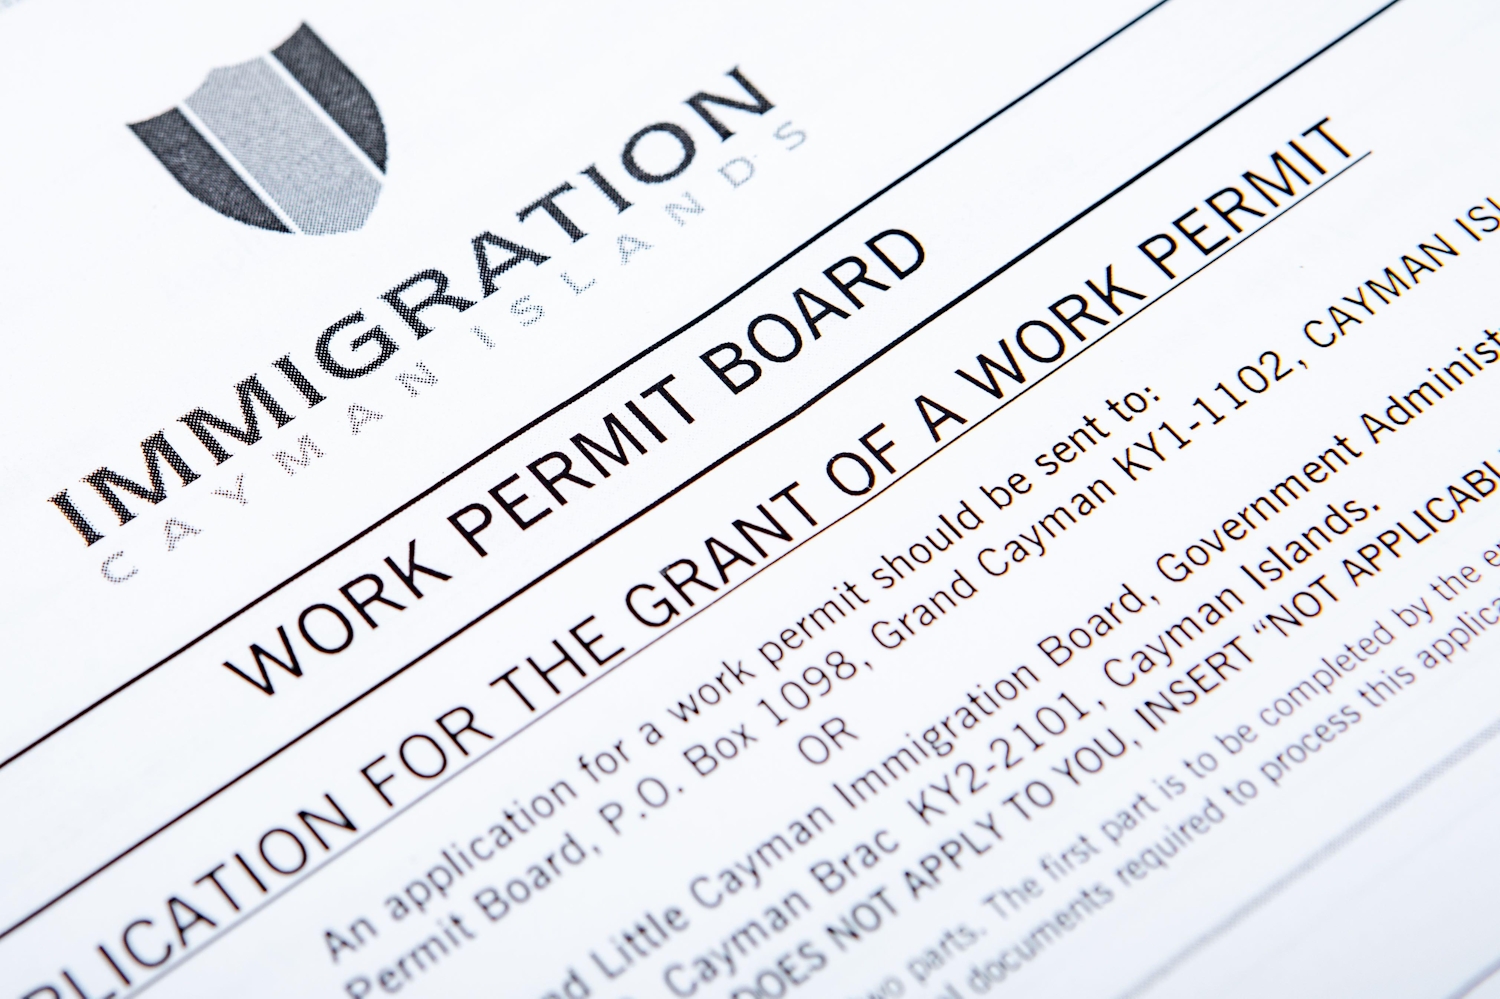 Work permit application form for the Cayman Islands